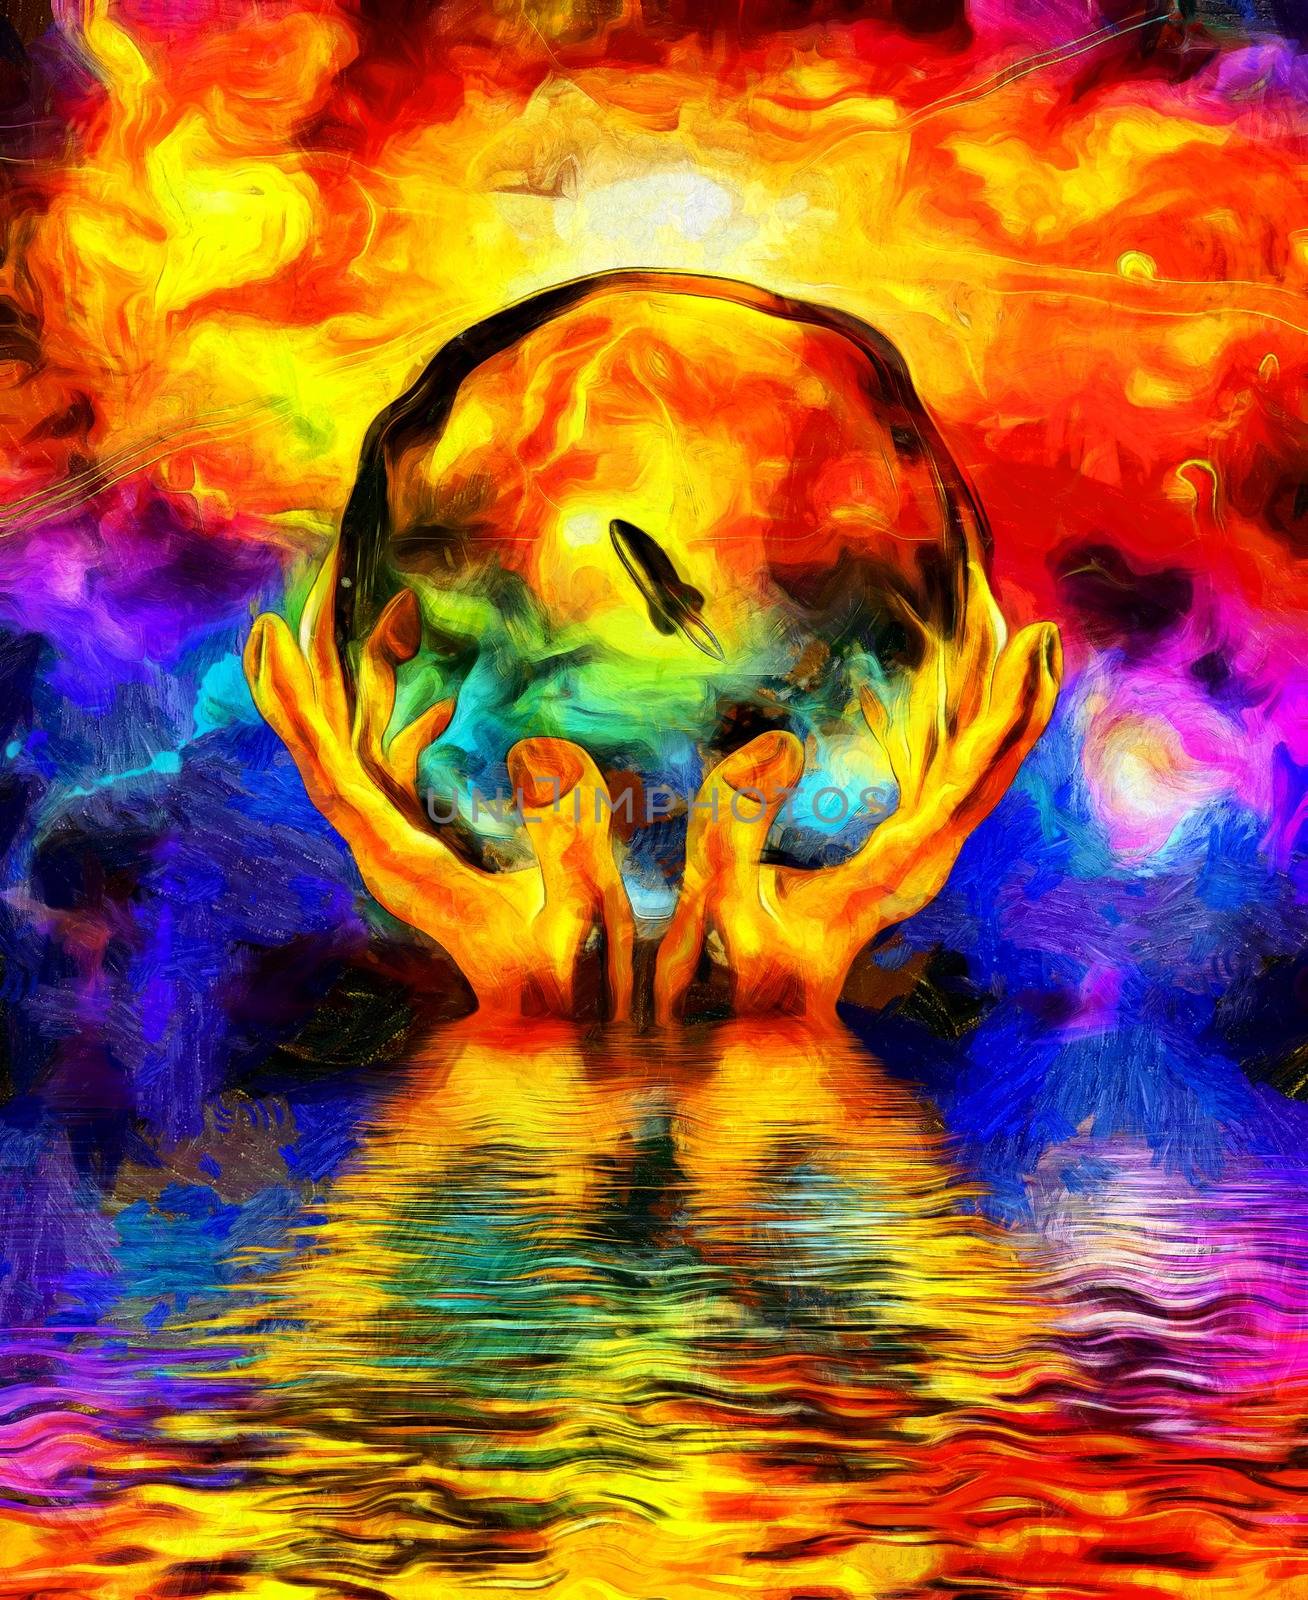 Surreal painting. Crystal ball in hands. Colorful universe reflects in the water.